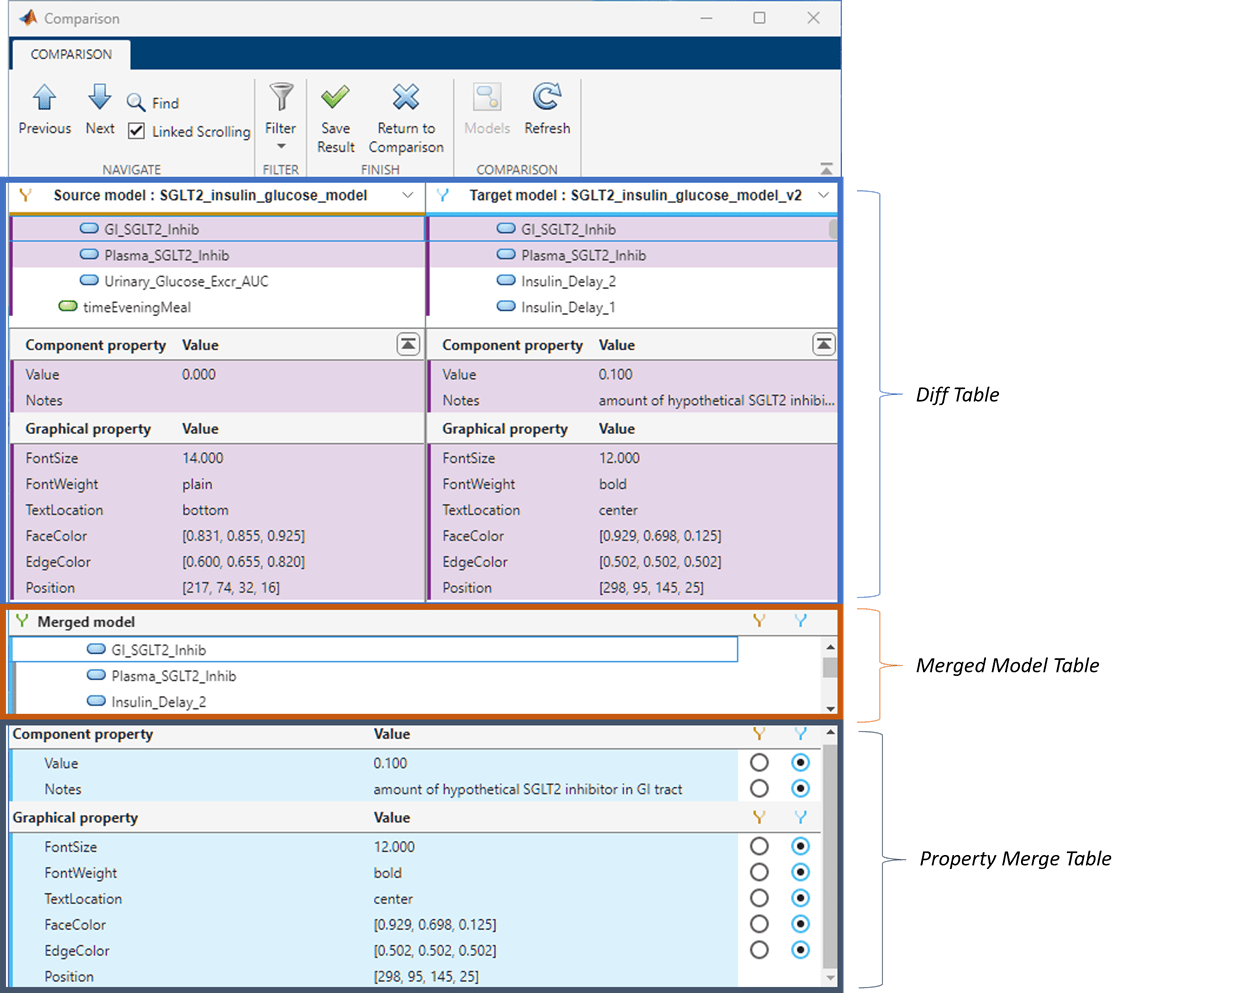 Comparison Tool in merge mode showing the Diff, Merged Model, and Property Merge tables